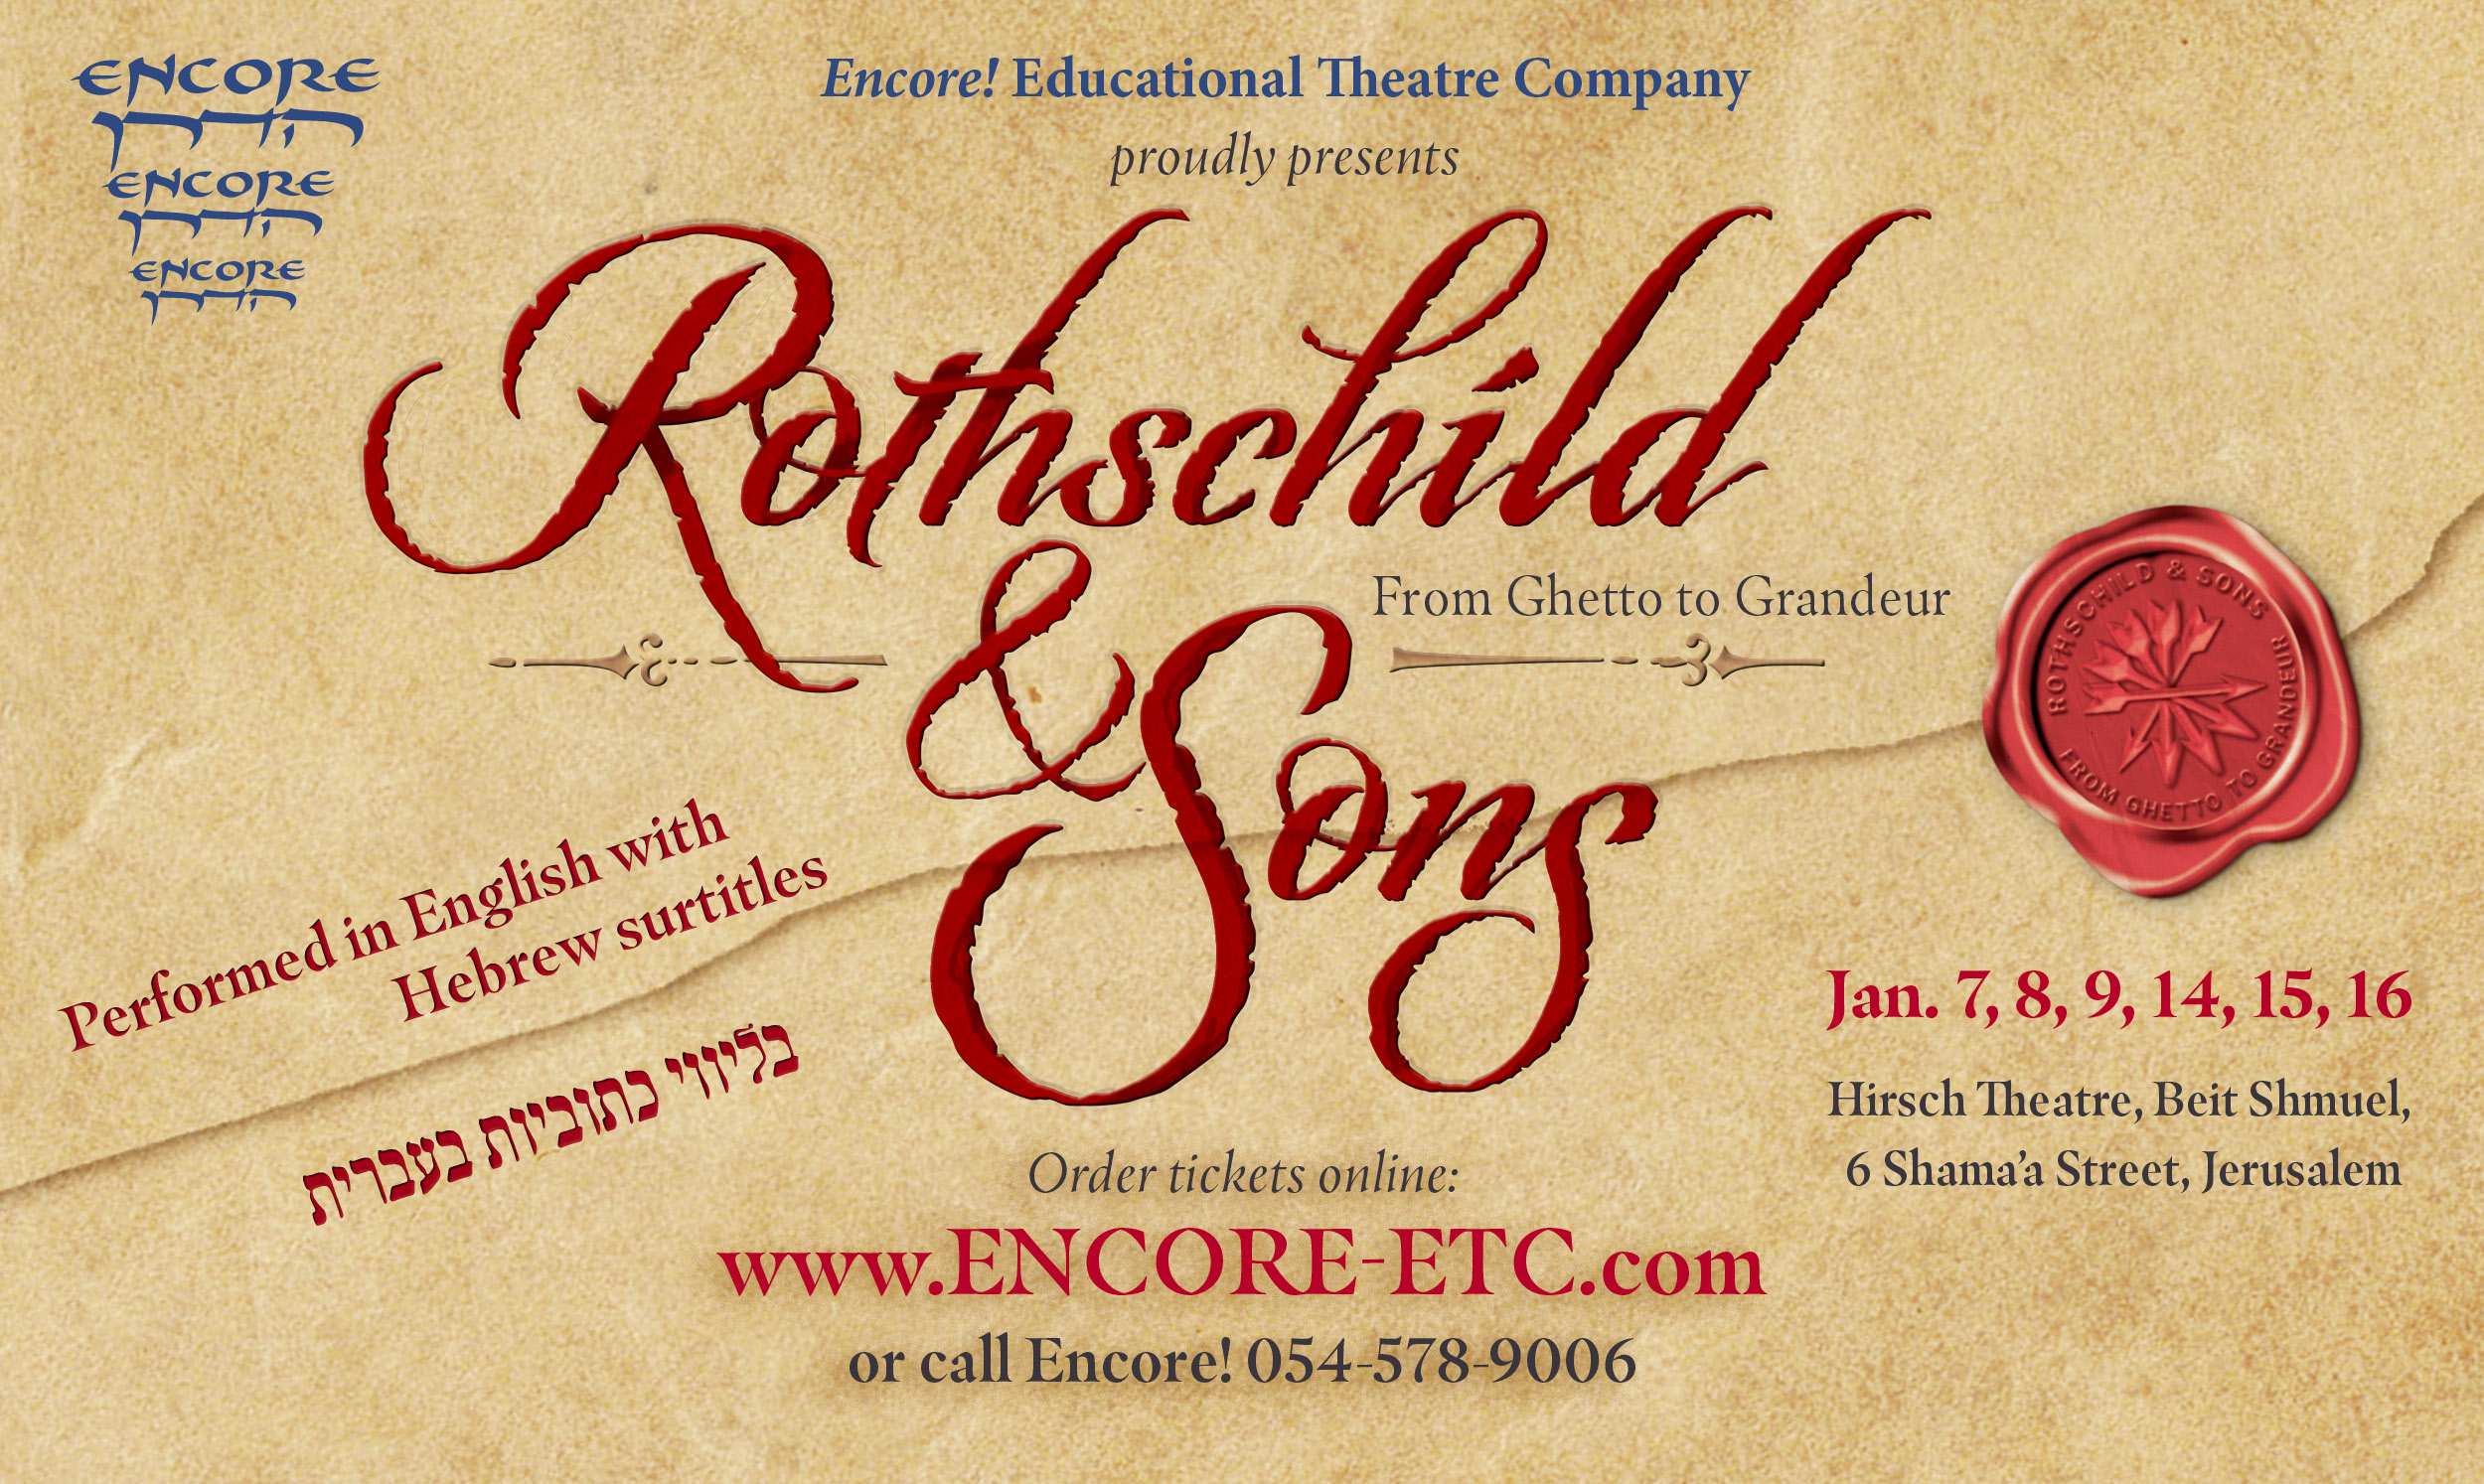 Promotional photo for the musical Rothschild and Sons playing in Jerusalem in January 2020.